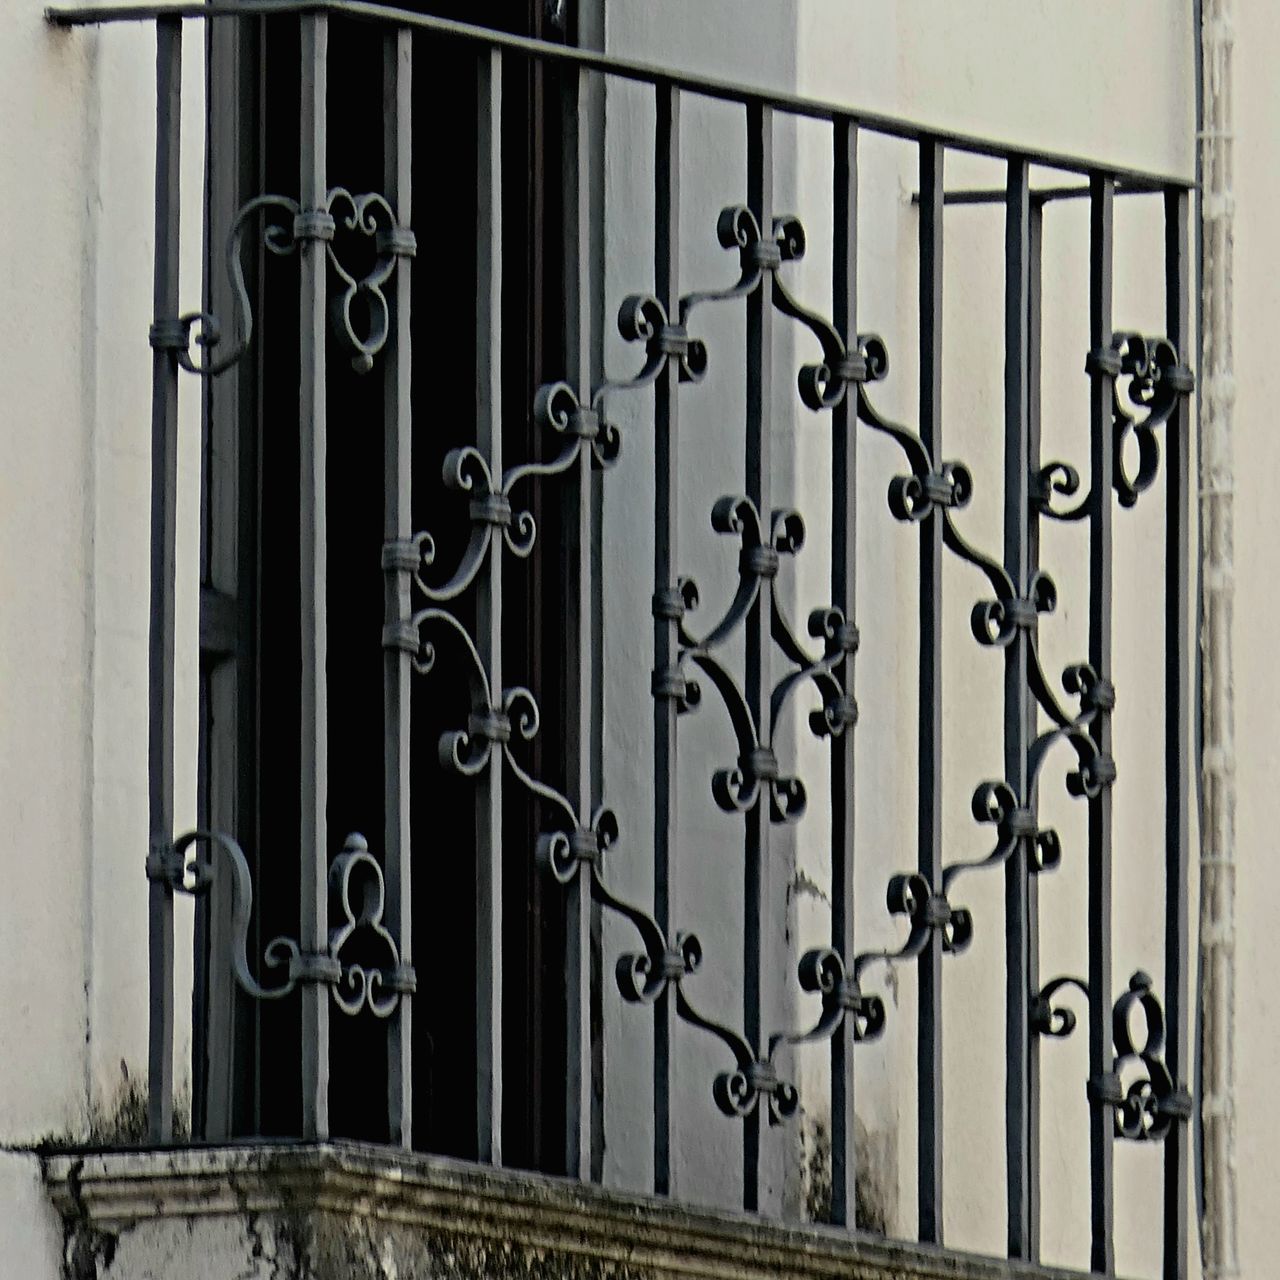 iron, architecture, metal, security, closed, protection, wrought iron, gate, built structure, entrance, building exterior, building, no people, door, handrail, baluster, pattern, day, interior design, glass, wall, residential district, lock, house, railing, wall - building feature, outdoors